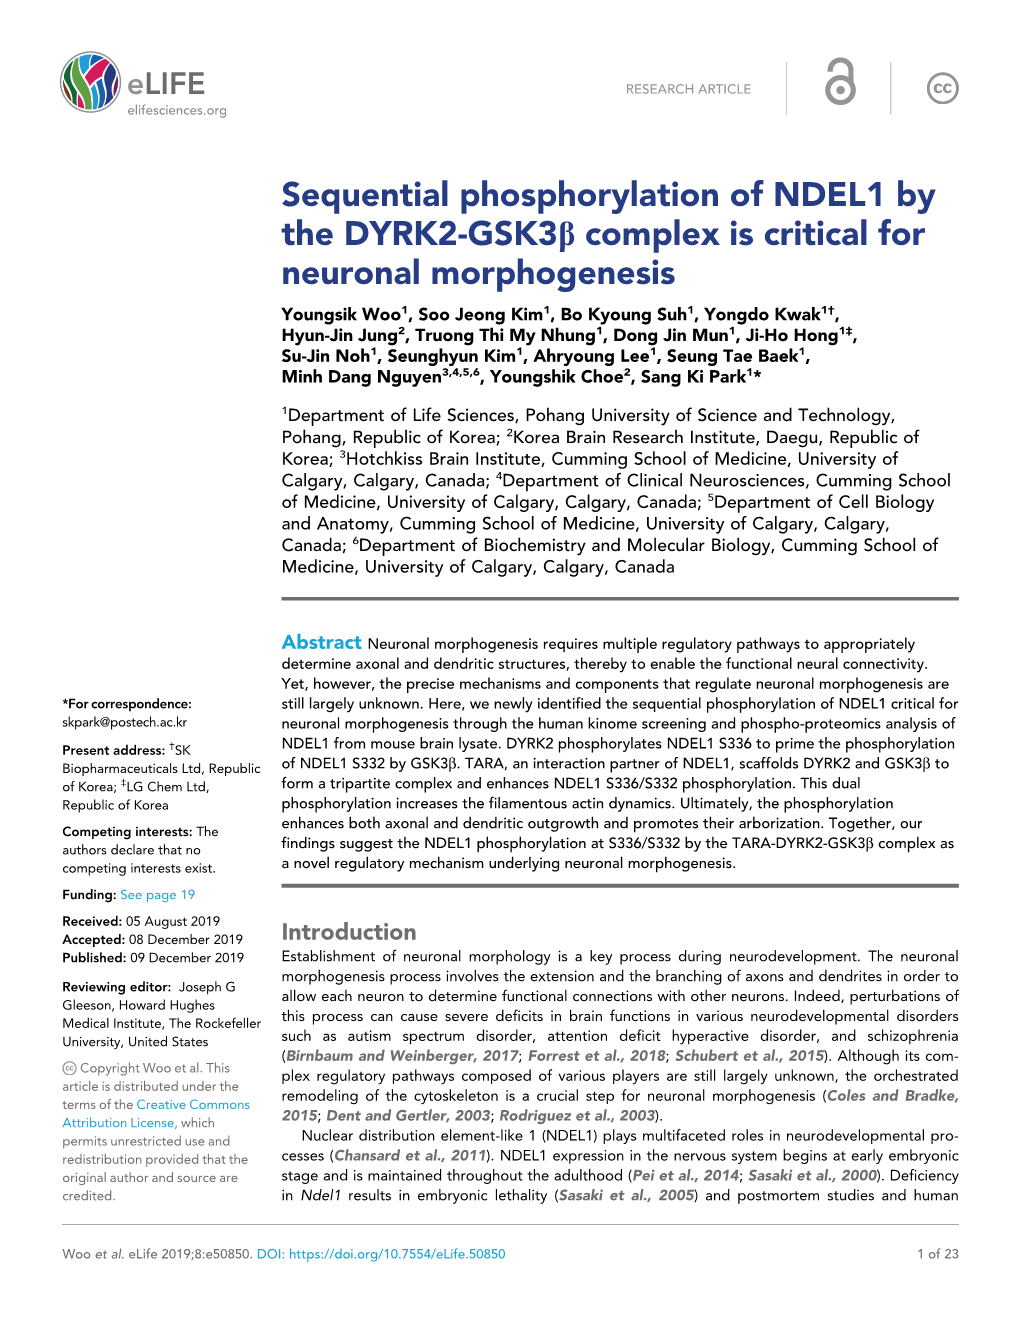 Sequential Phosphorylation of NDEL1 by the DYRK2-Gsk3b Complex Is